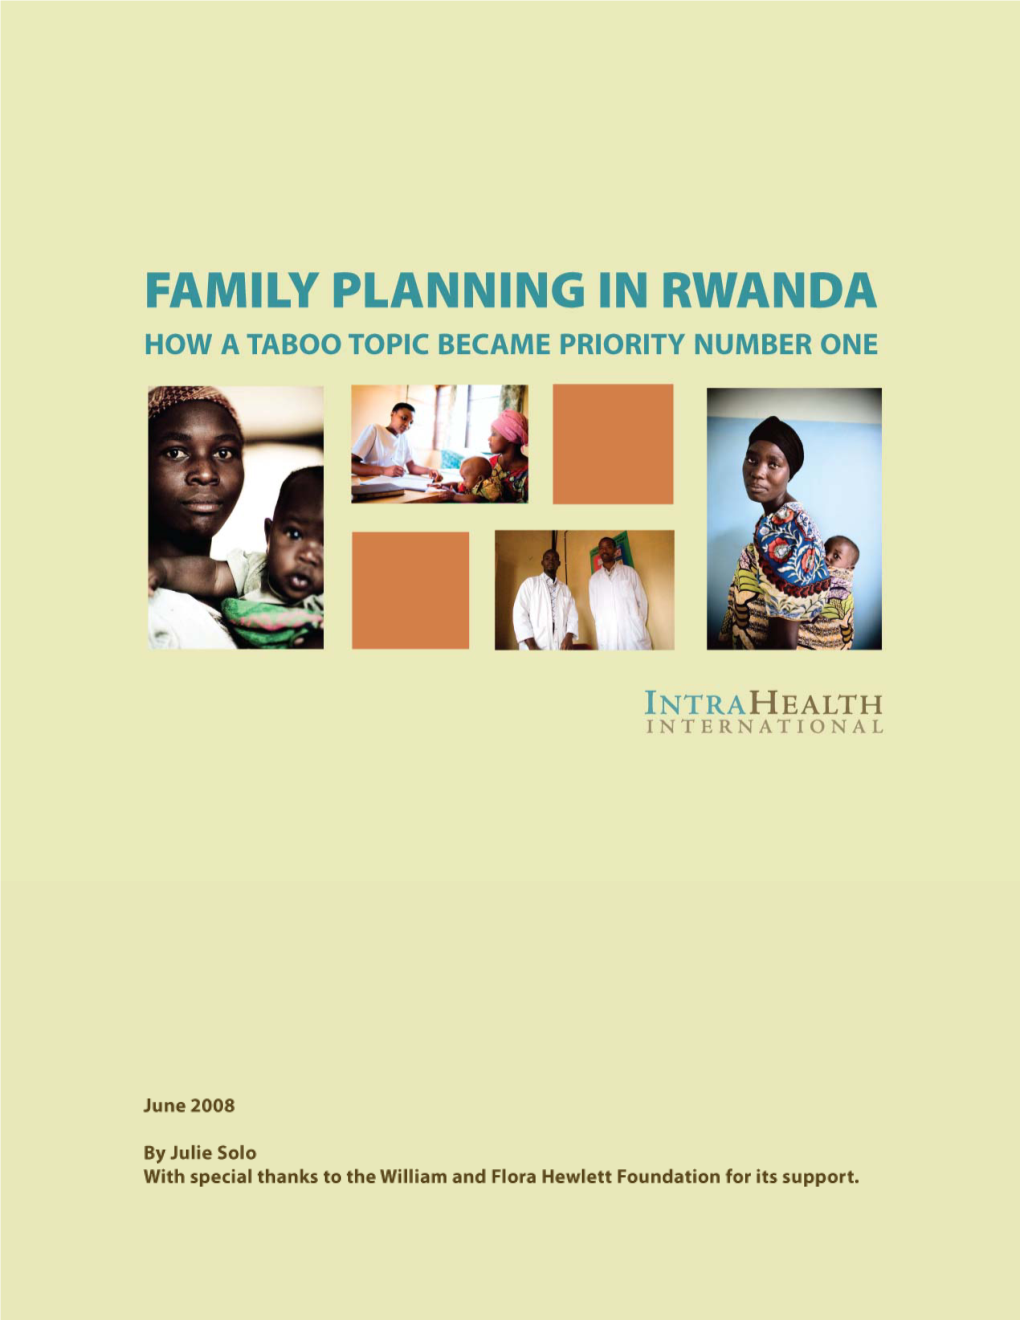 FAMILY PLANNING in RWANDA: How a Taboo Topic Became Priority